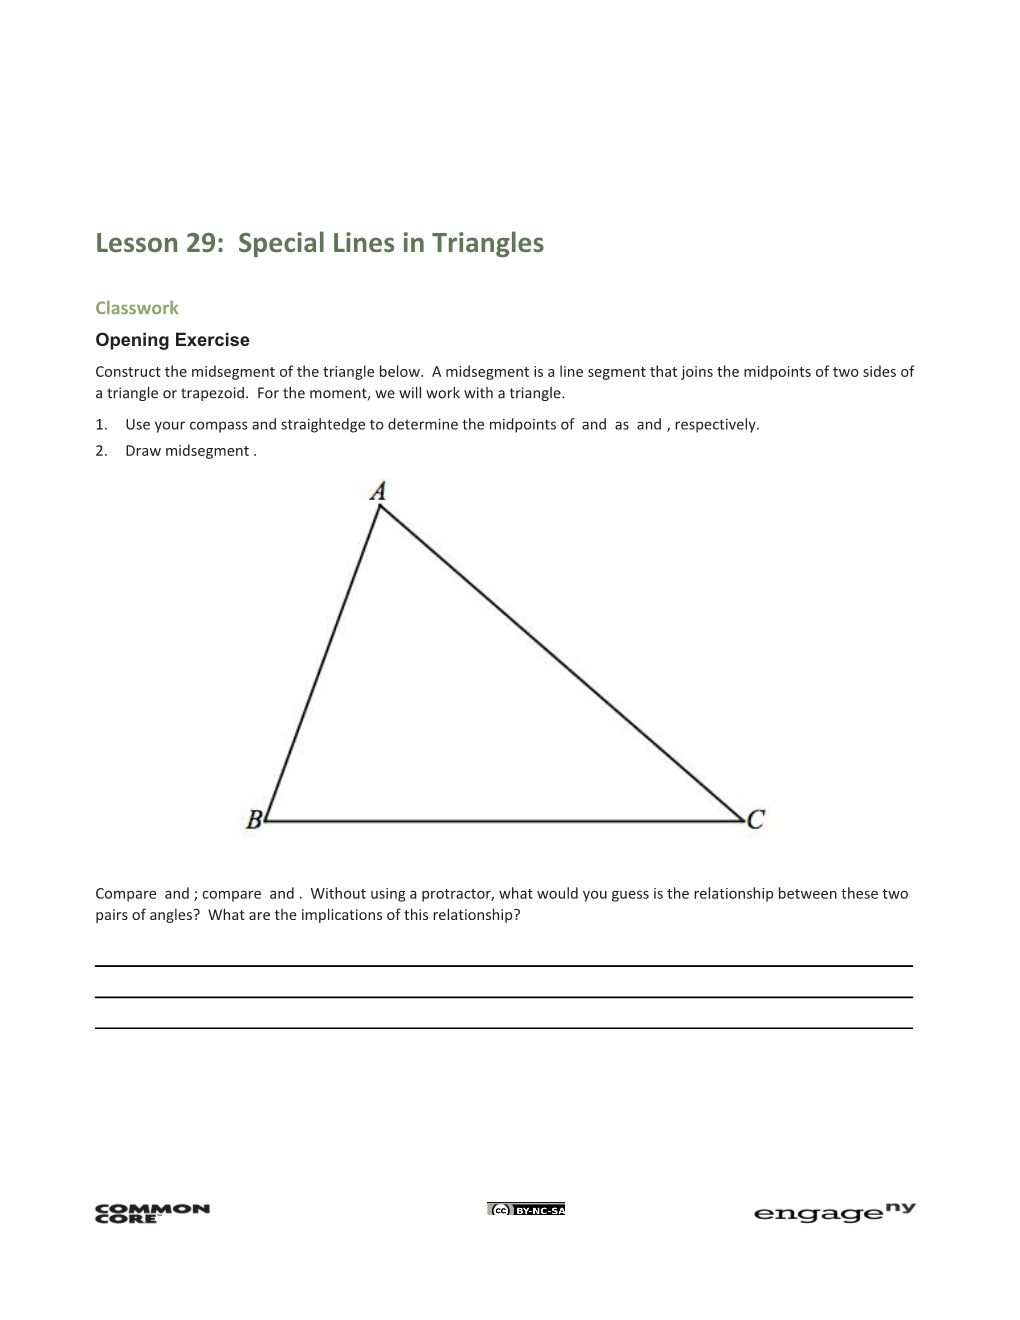 Lesson 29: Special Lines in Triangles